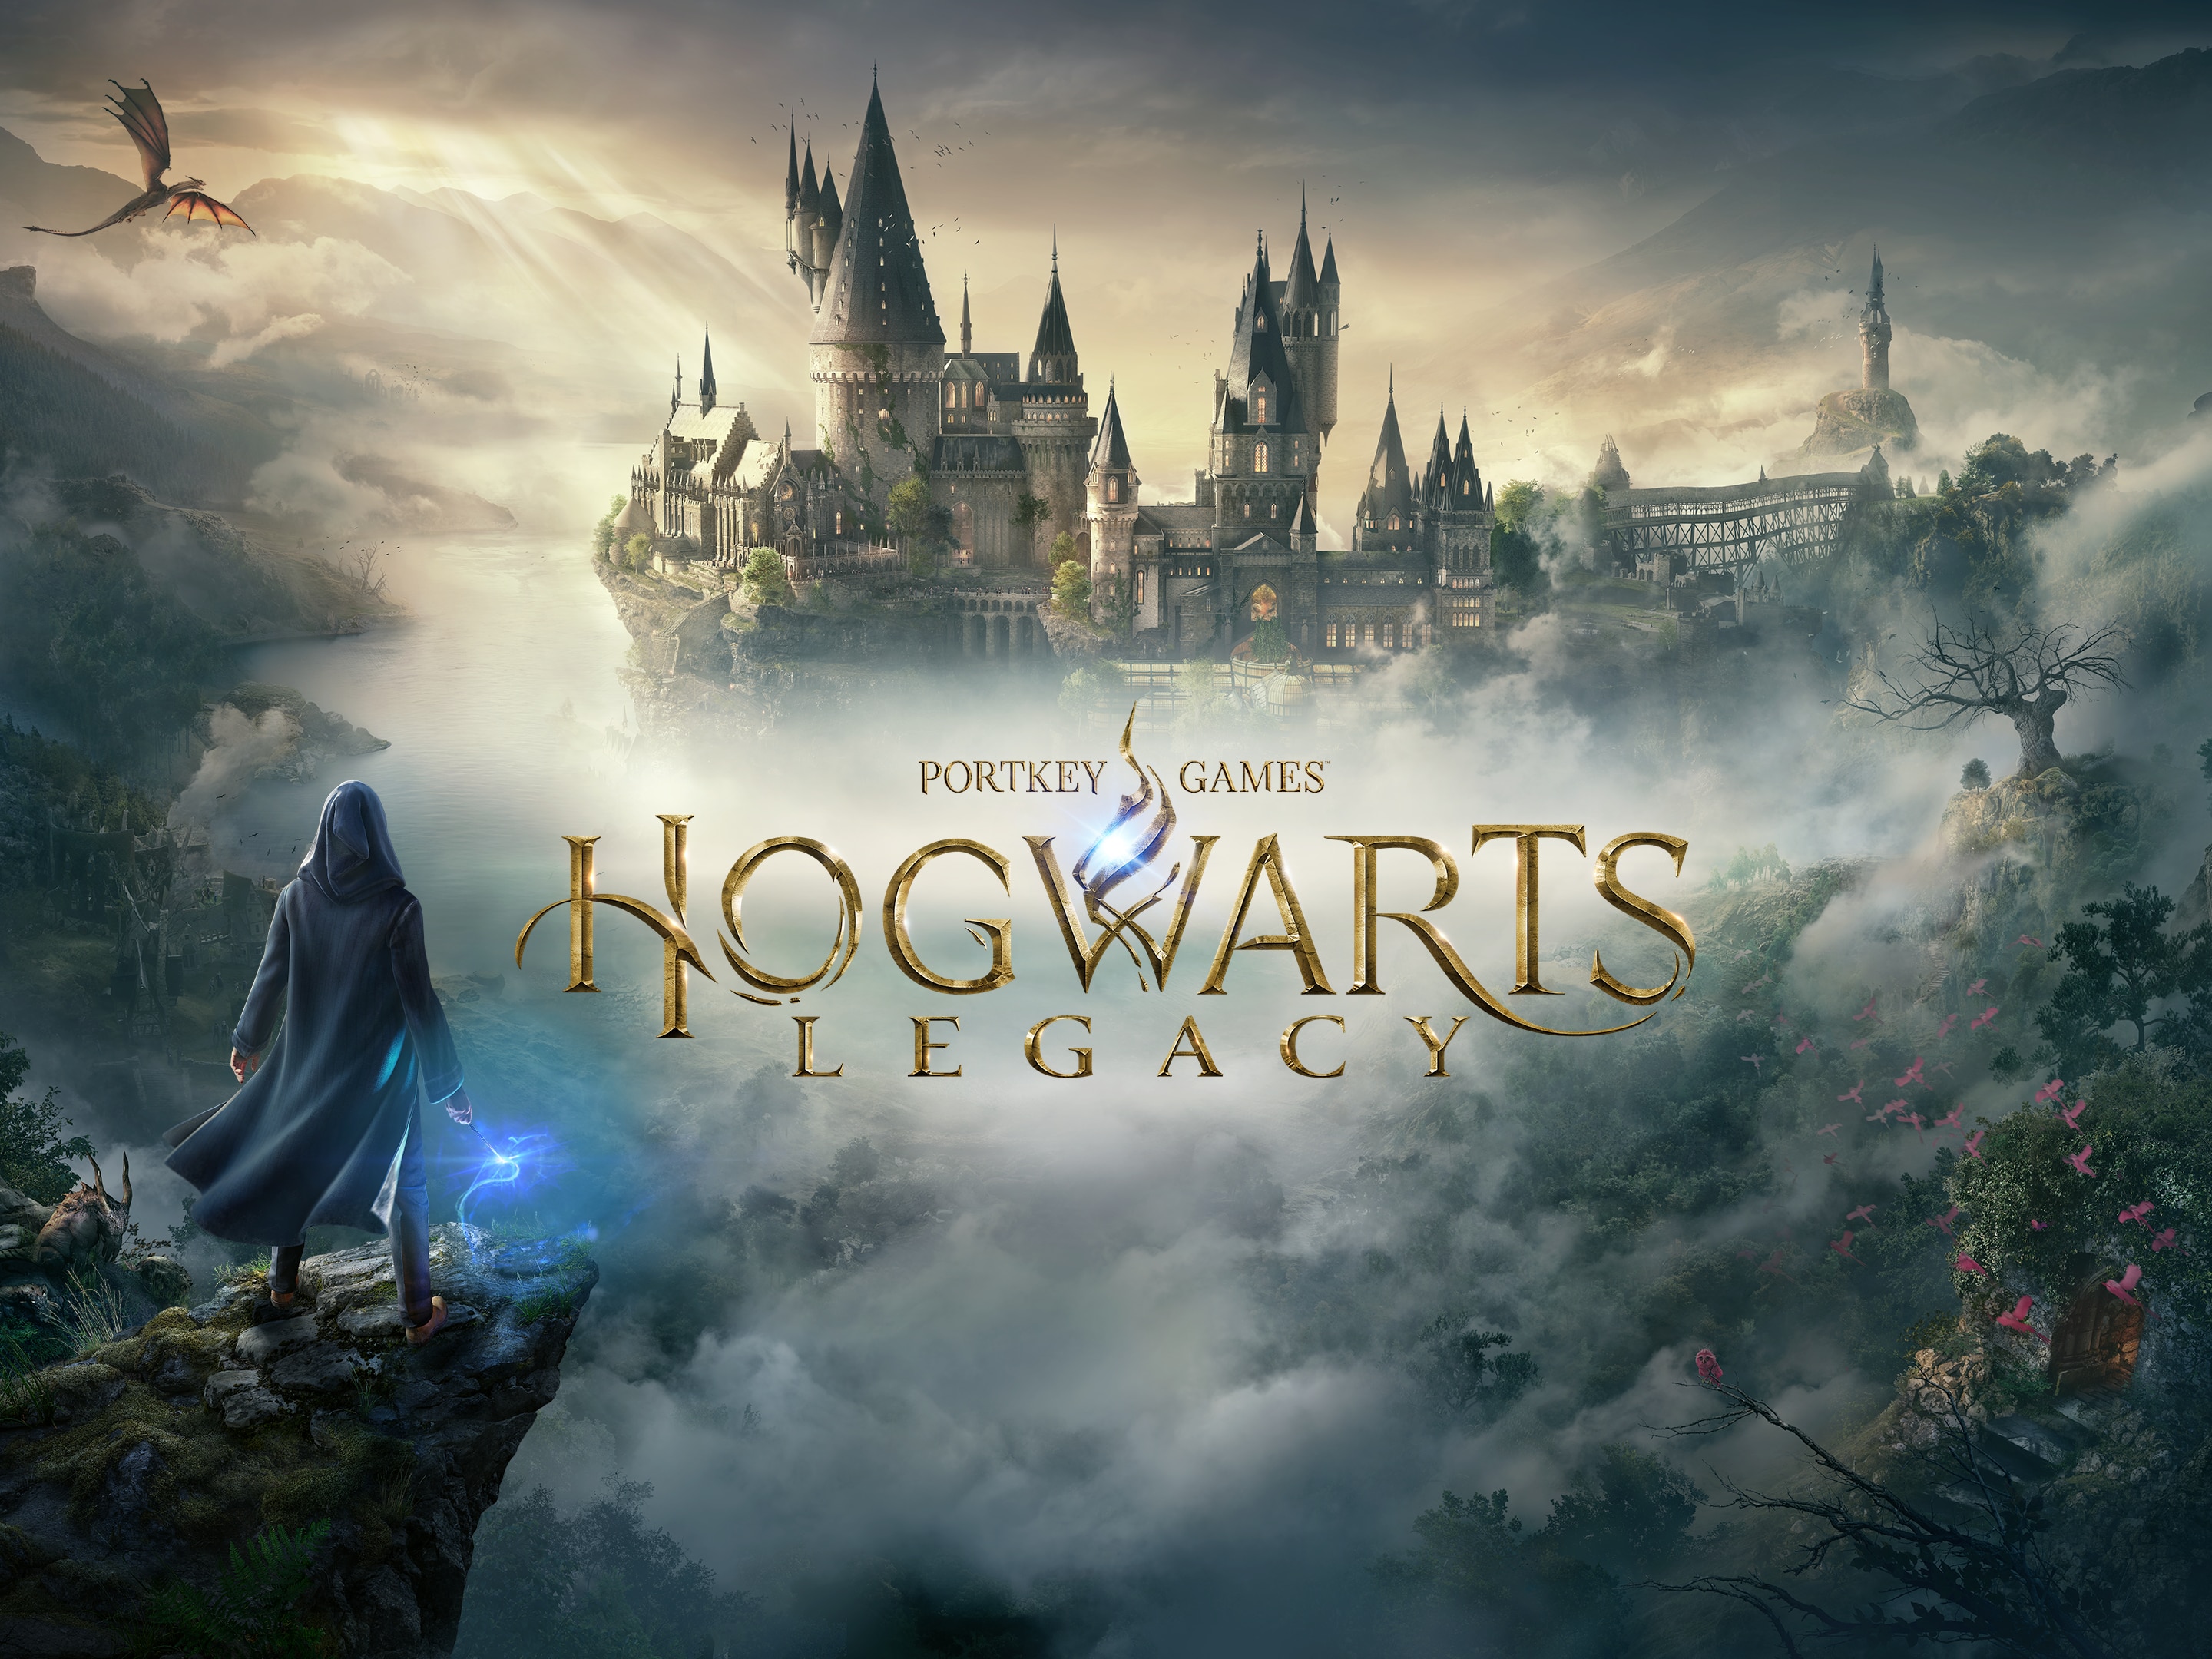 hogwarts legacy digital deluxe edition price